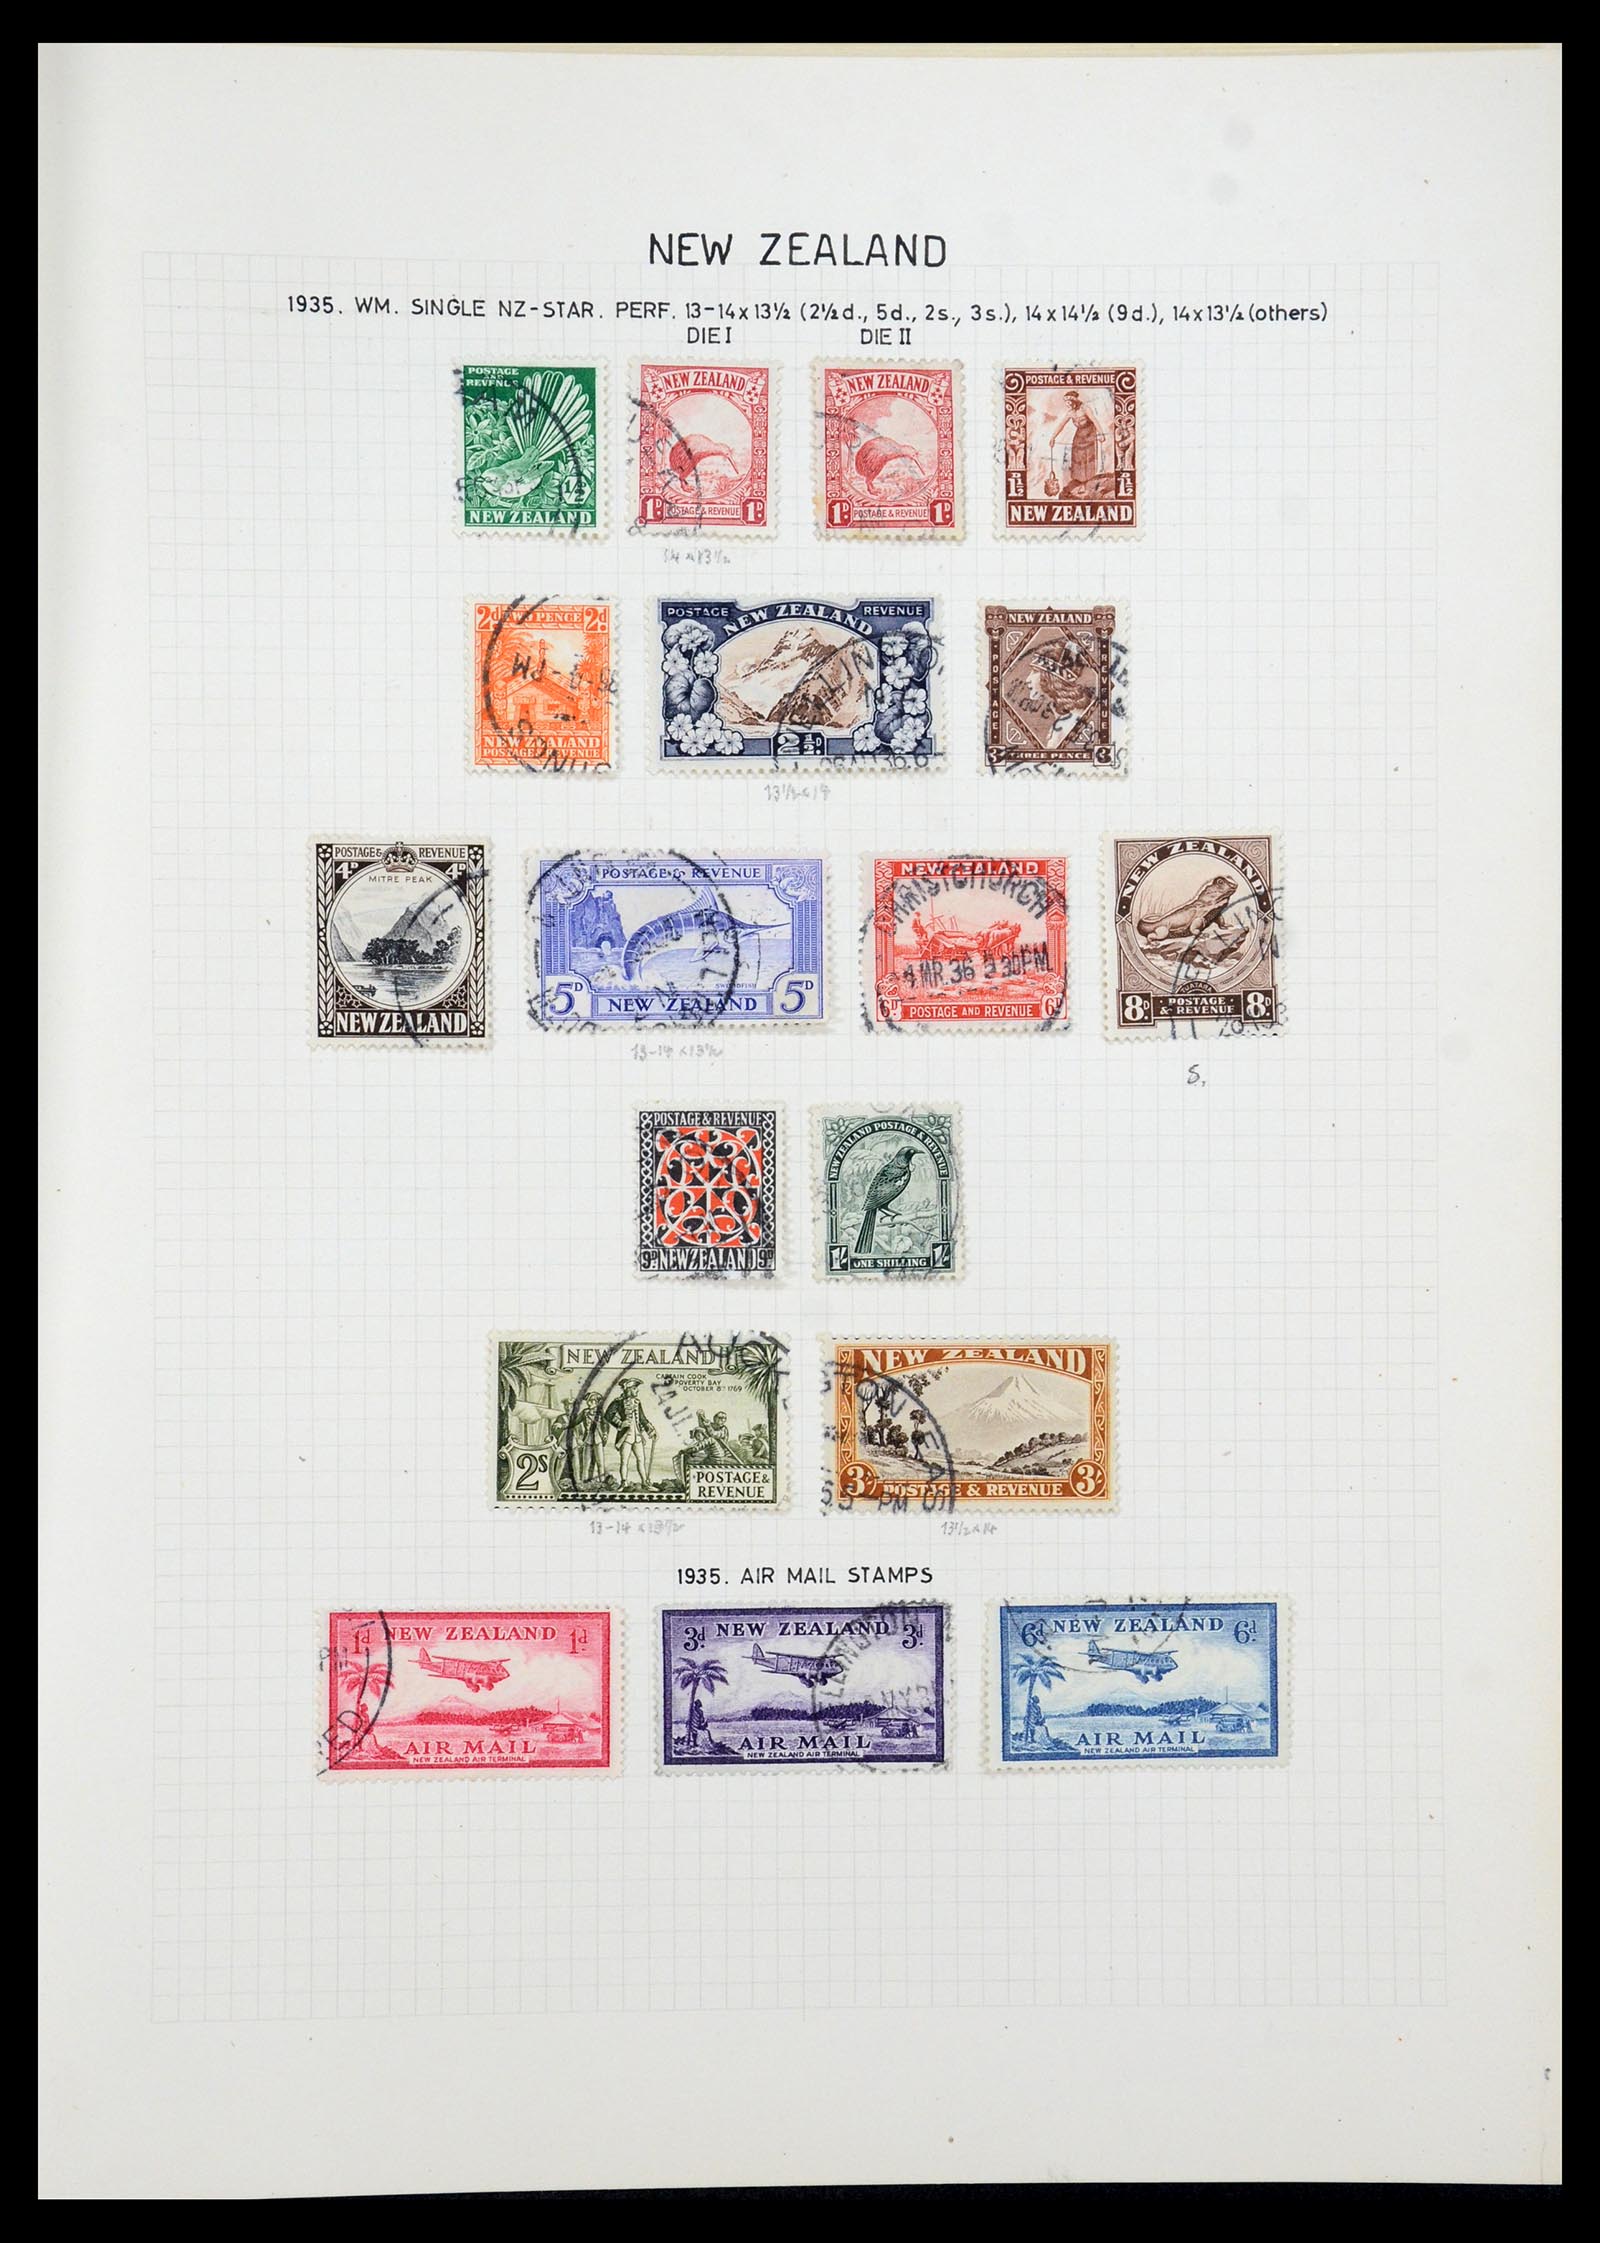 35500 023 - Stamp Collection 35500 British Commonwealth supercollection 1855-1970.